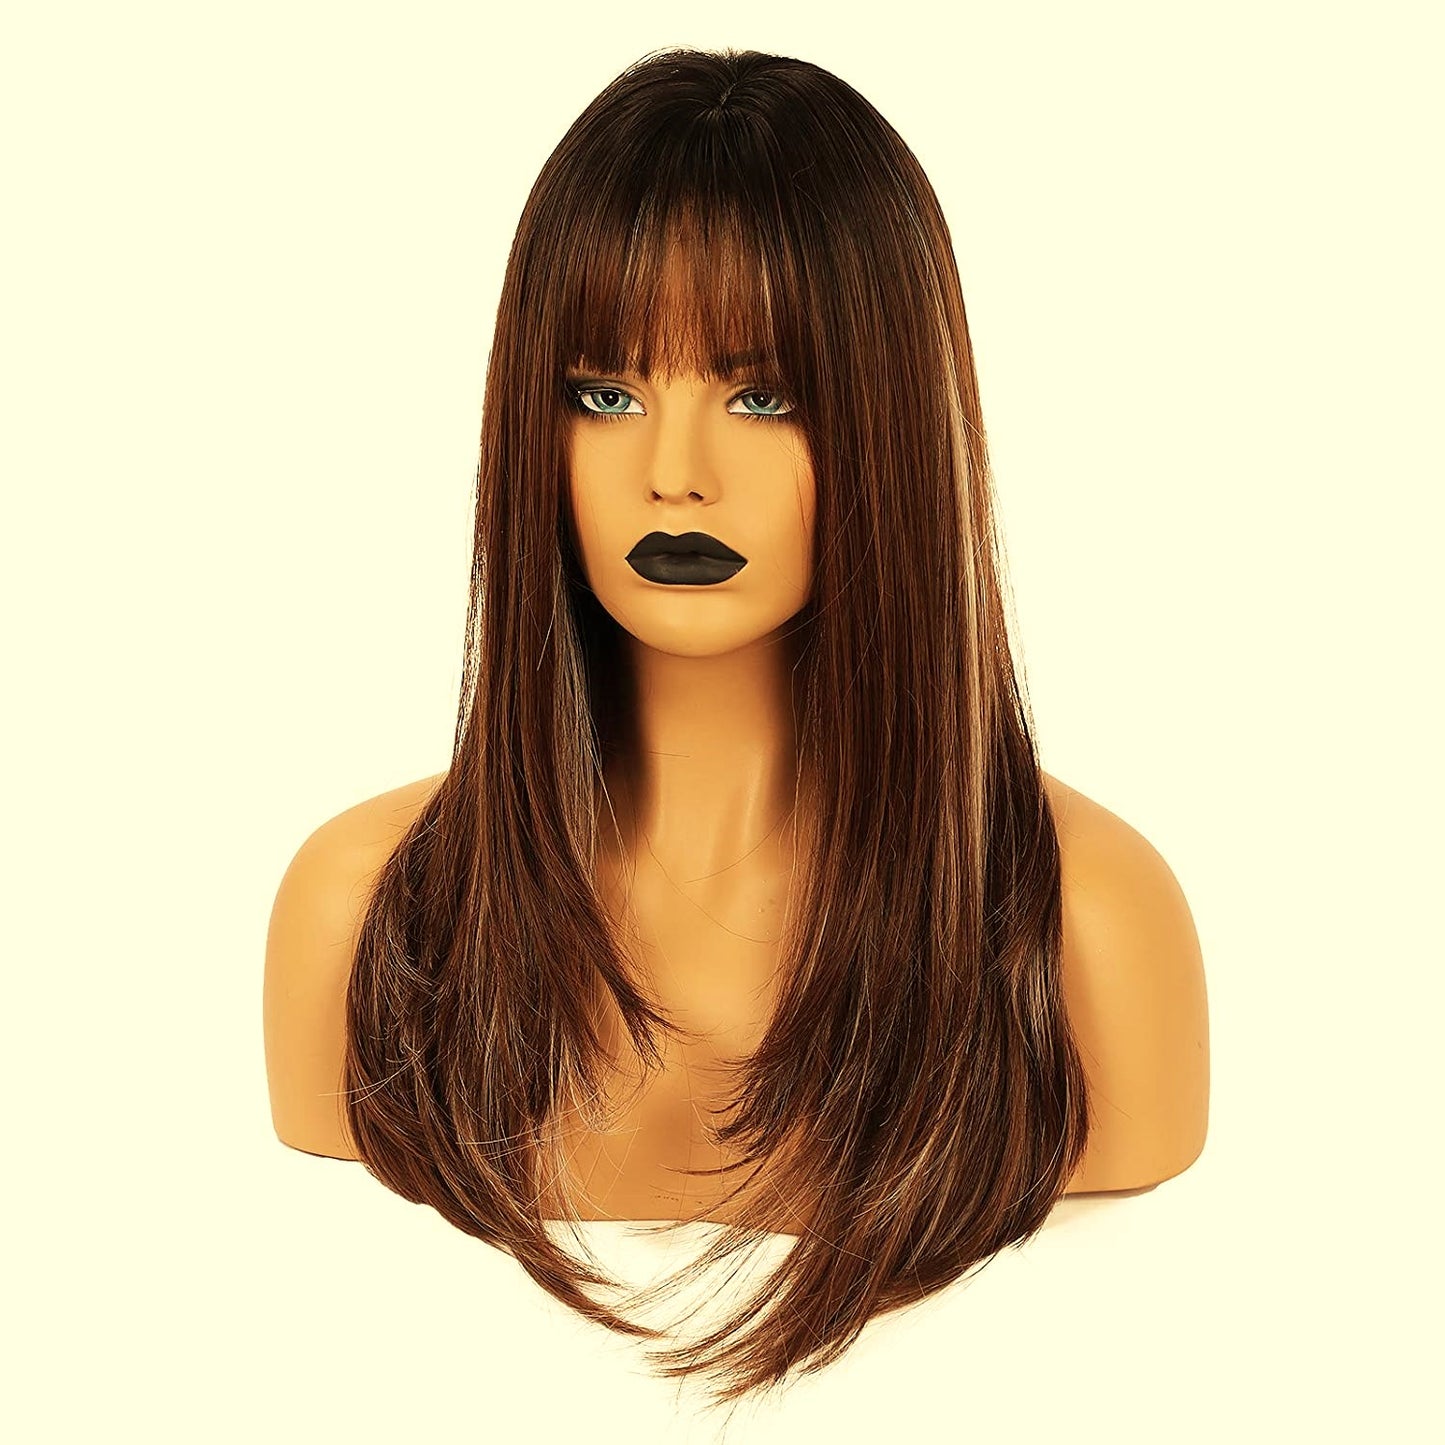 Lush Locks  Women Brown Wig Black Roots Synthetic Wigs with Bangs Long Straight Brunette Wig Natural Look Realistic Wig 20 Inches